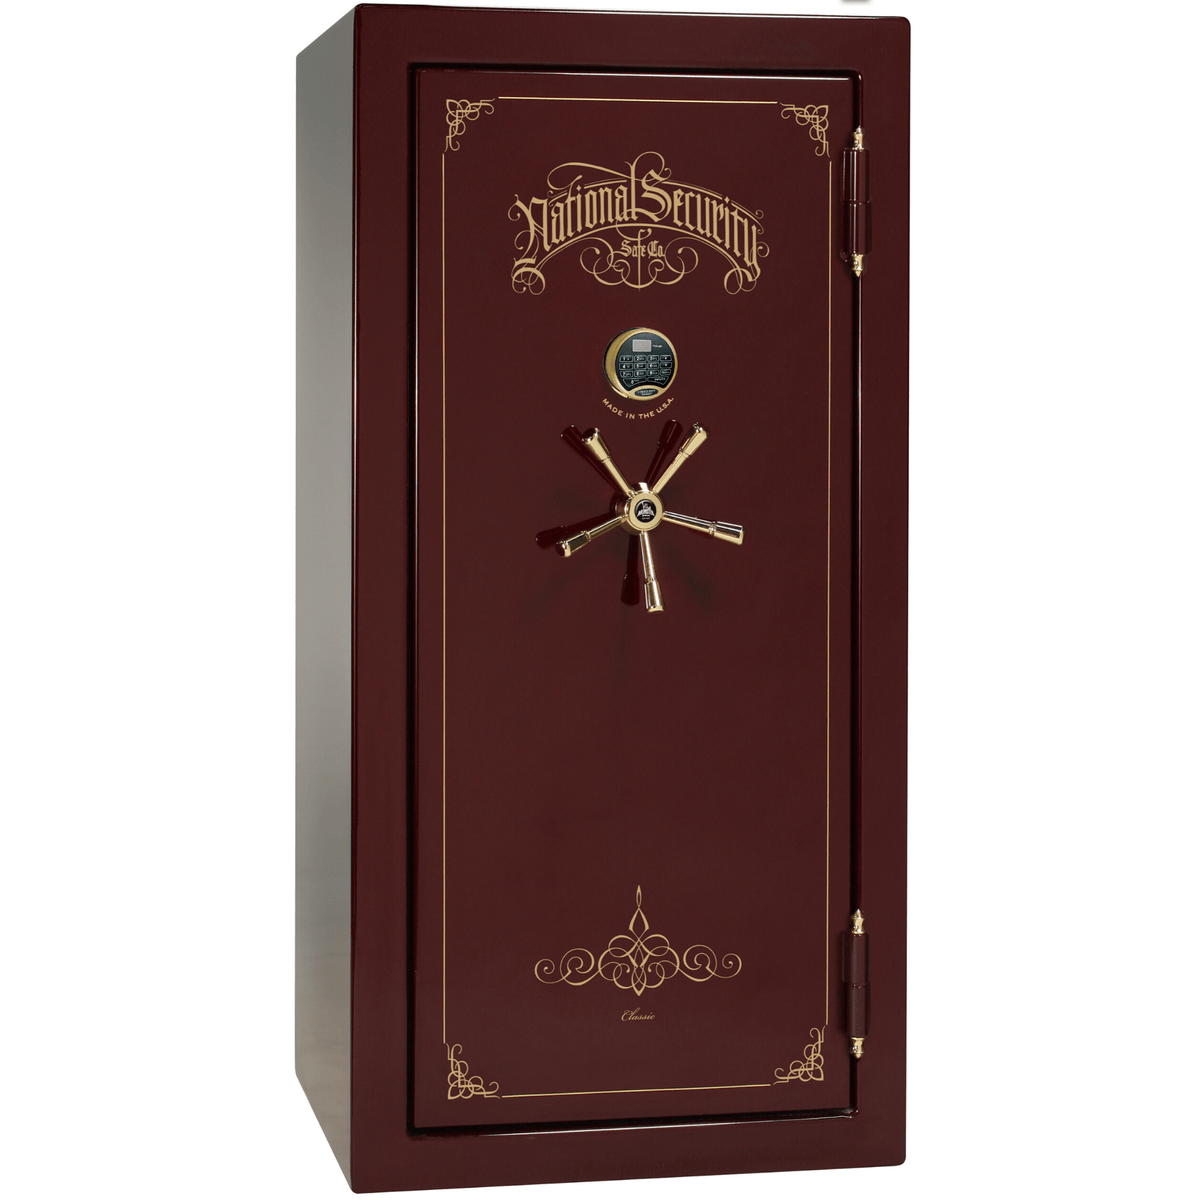 Liberty Safe Classic Plus 25 in Burgundy Gloss with Brass Electronic Lock, closed door.